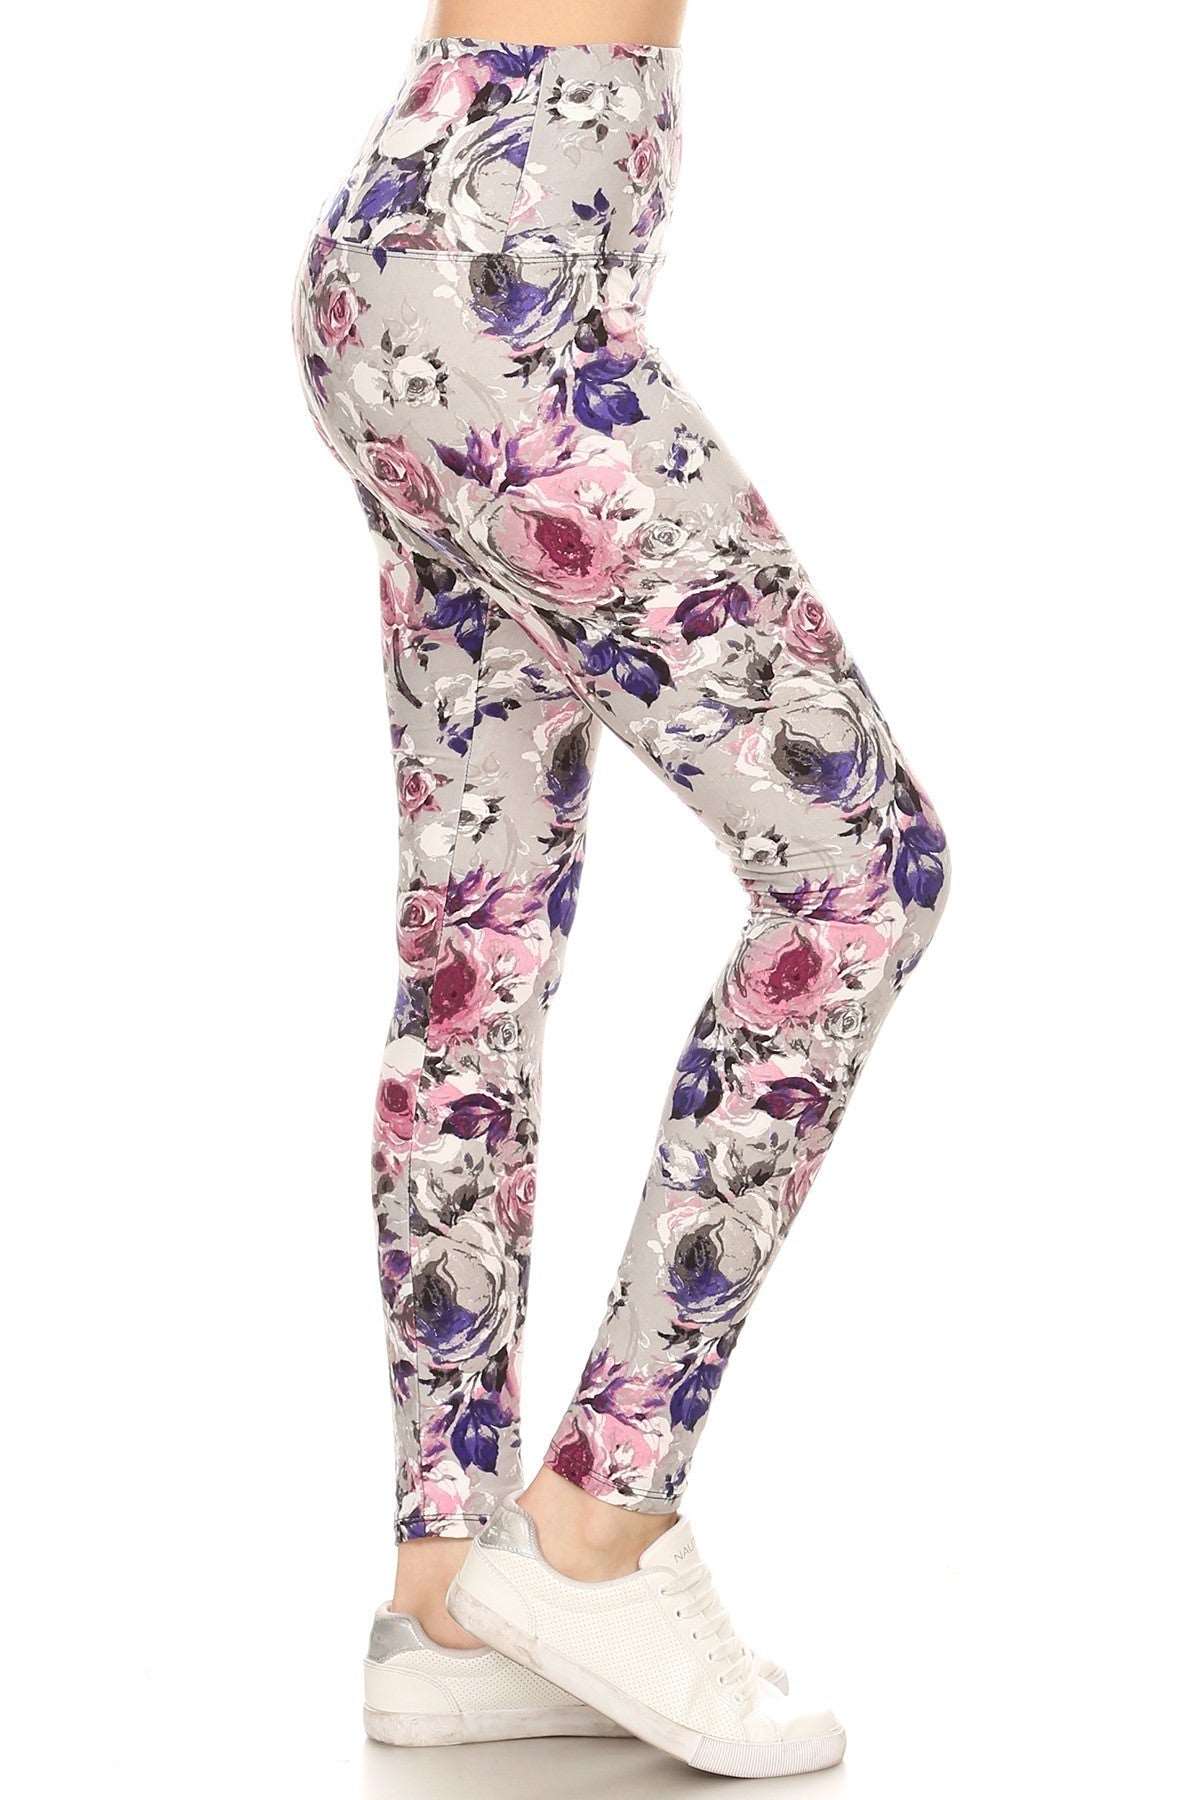 5-inch Long Yoga Style Banded Lined Floral Printed Knit Legging With High Waist | us.meeeshop